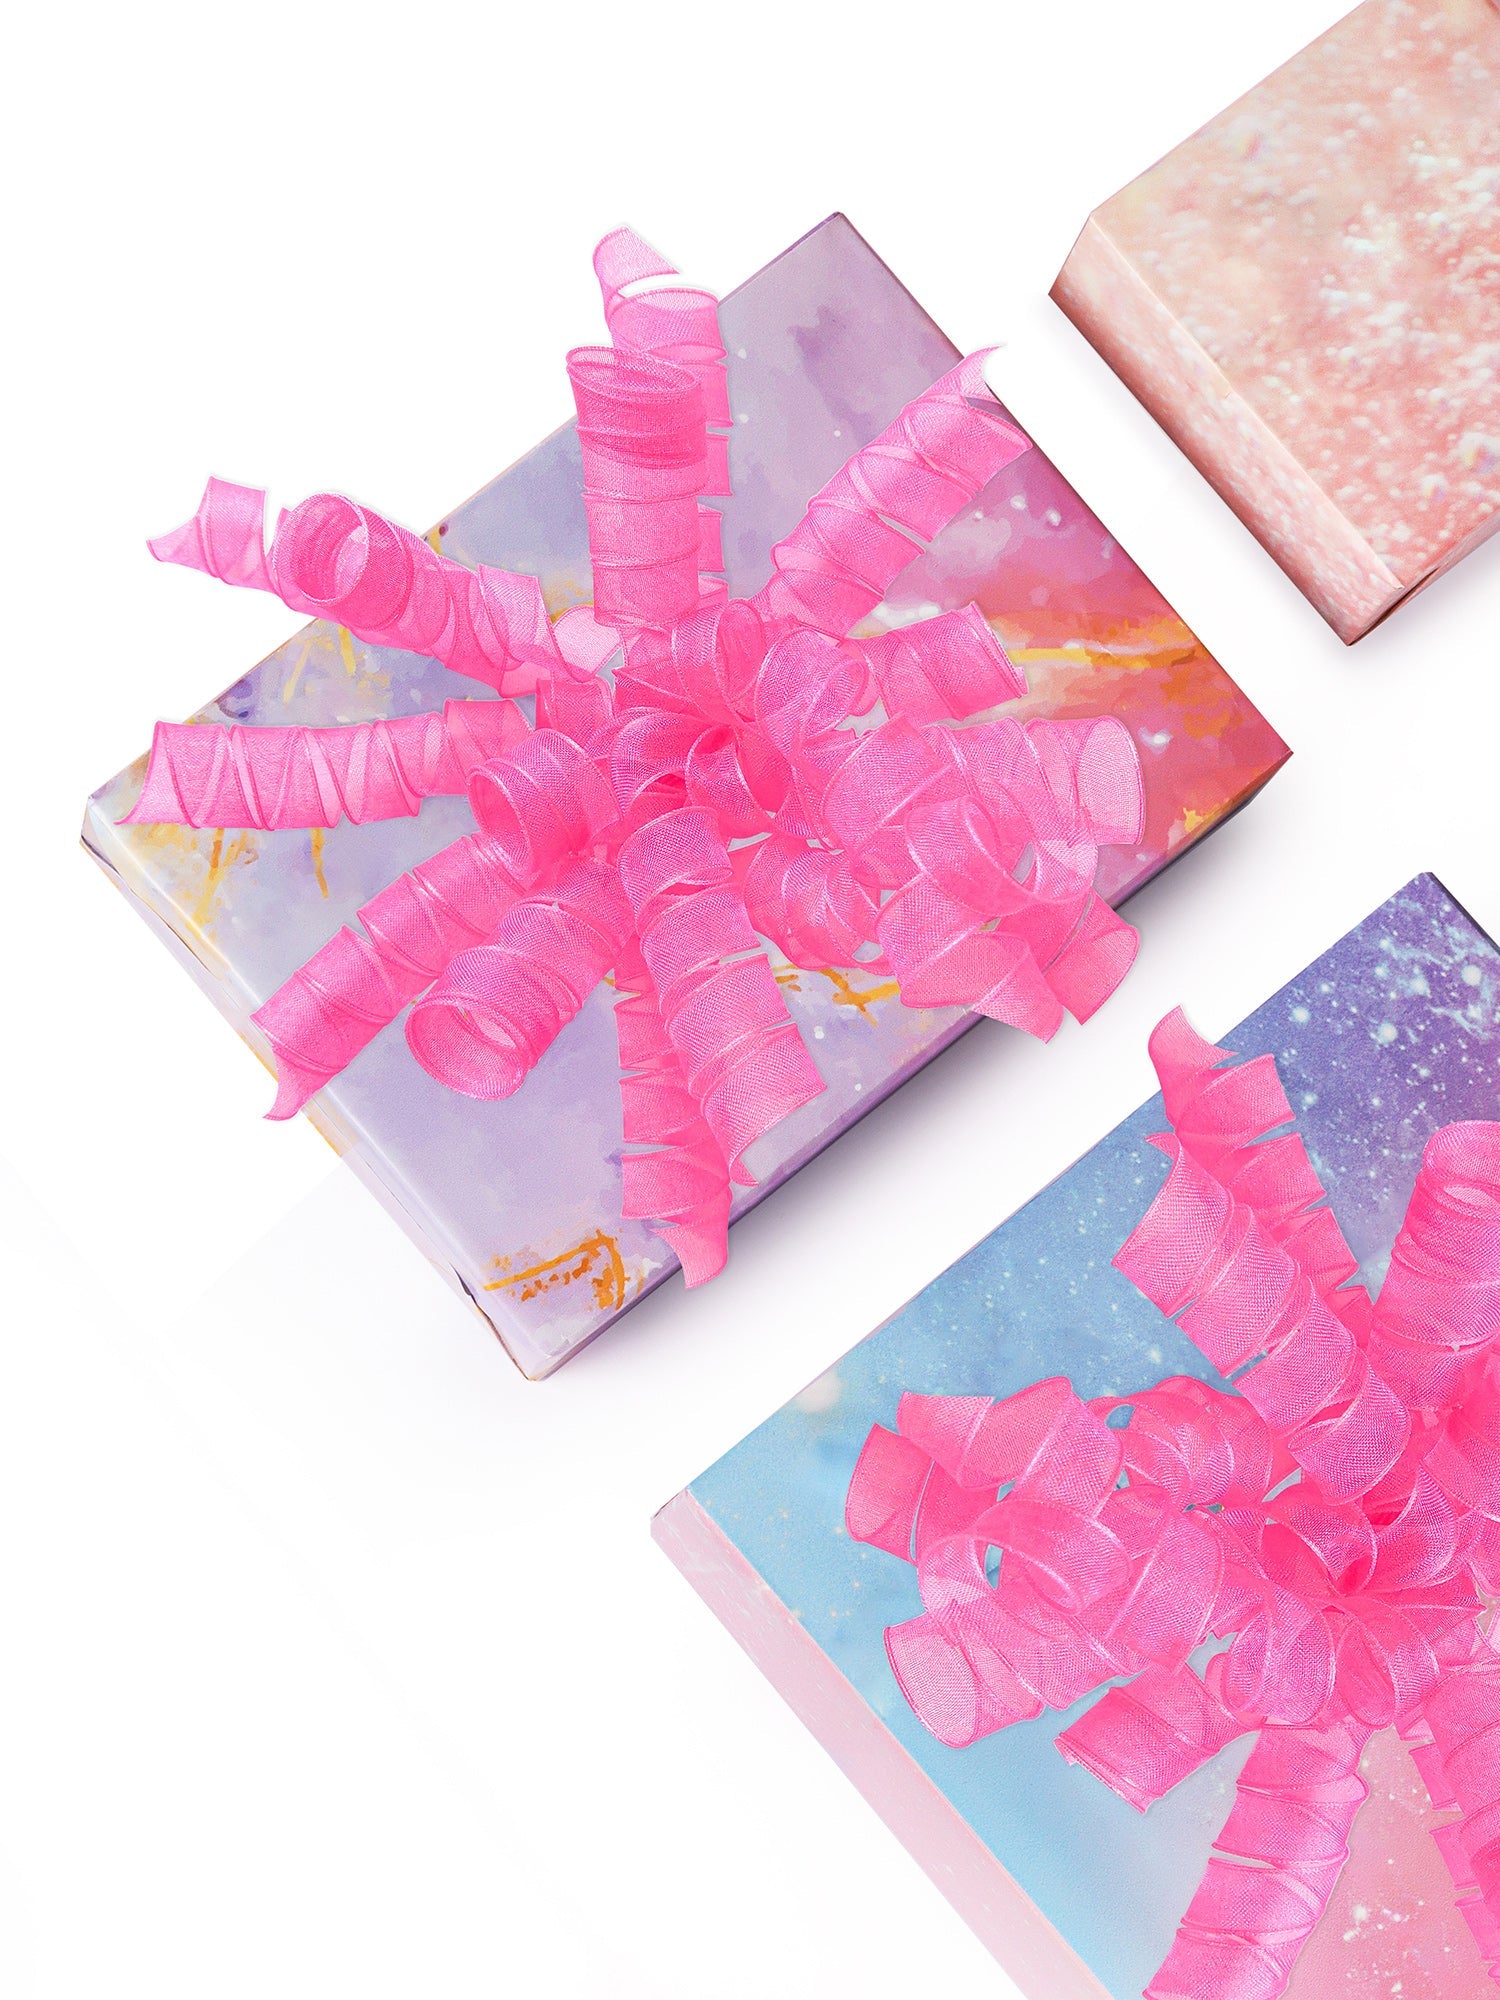 Curly Bows Gift Wrap Accessory - 2 PCs Fuchsia Color Bow